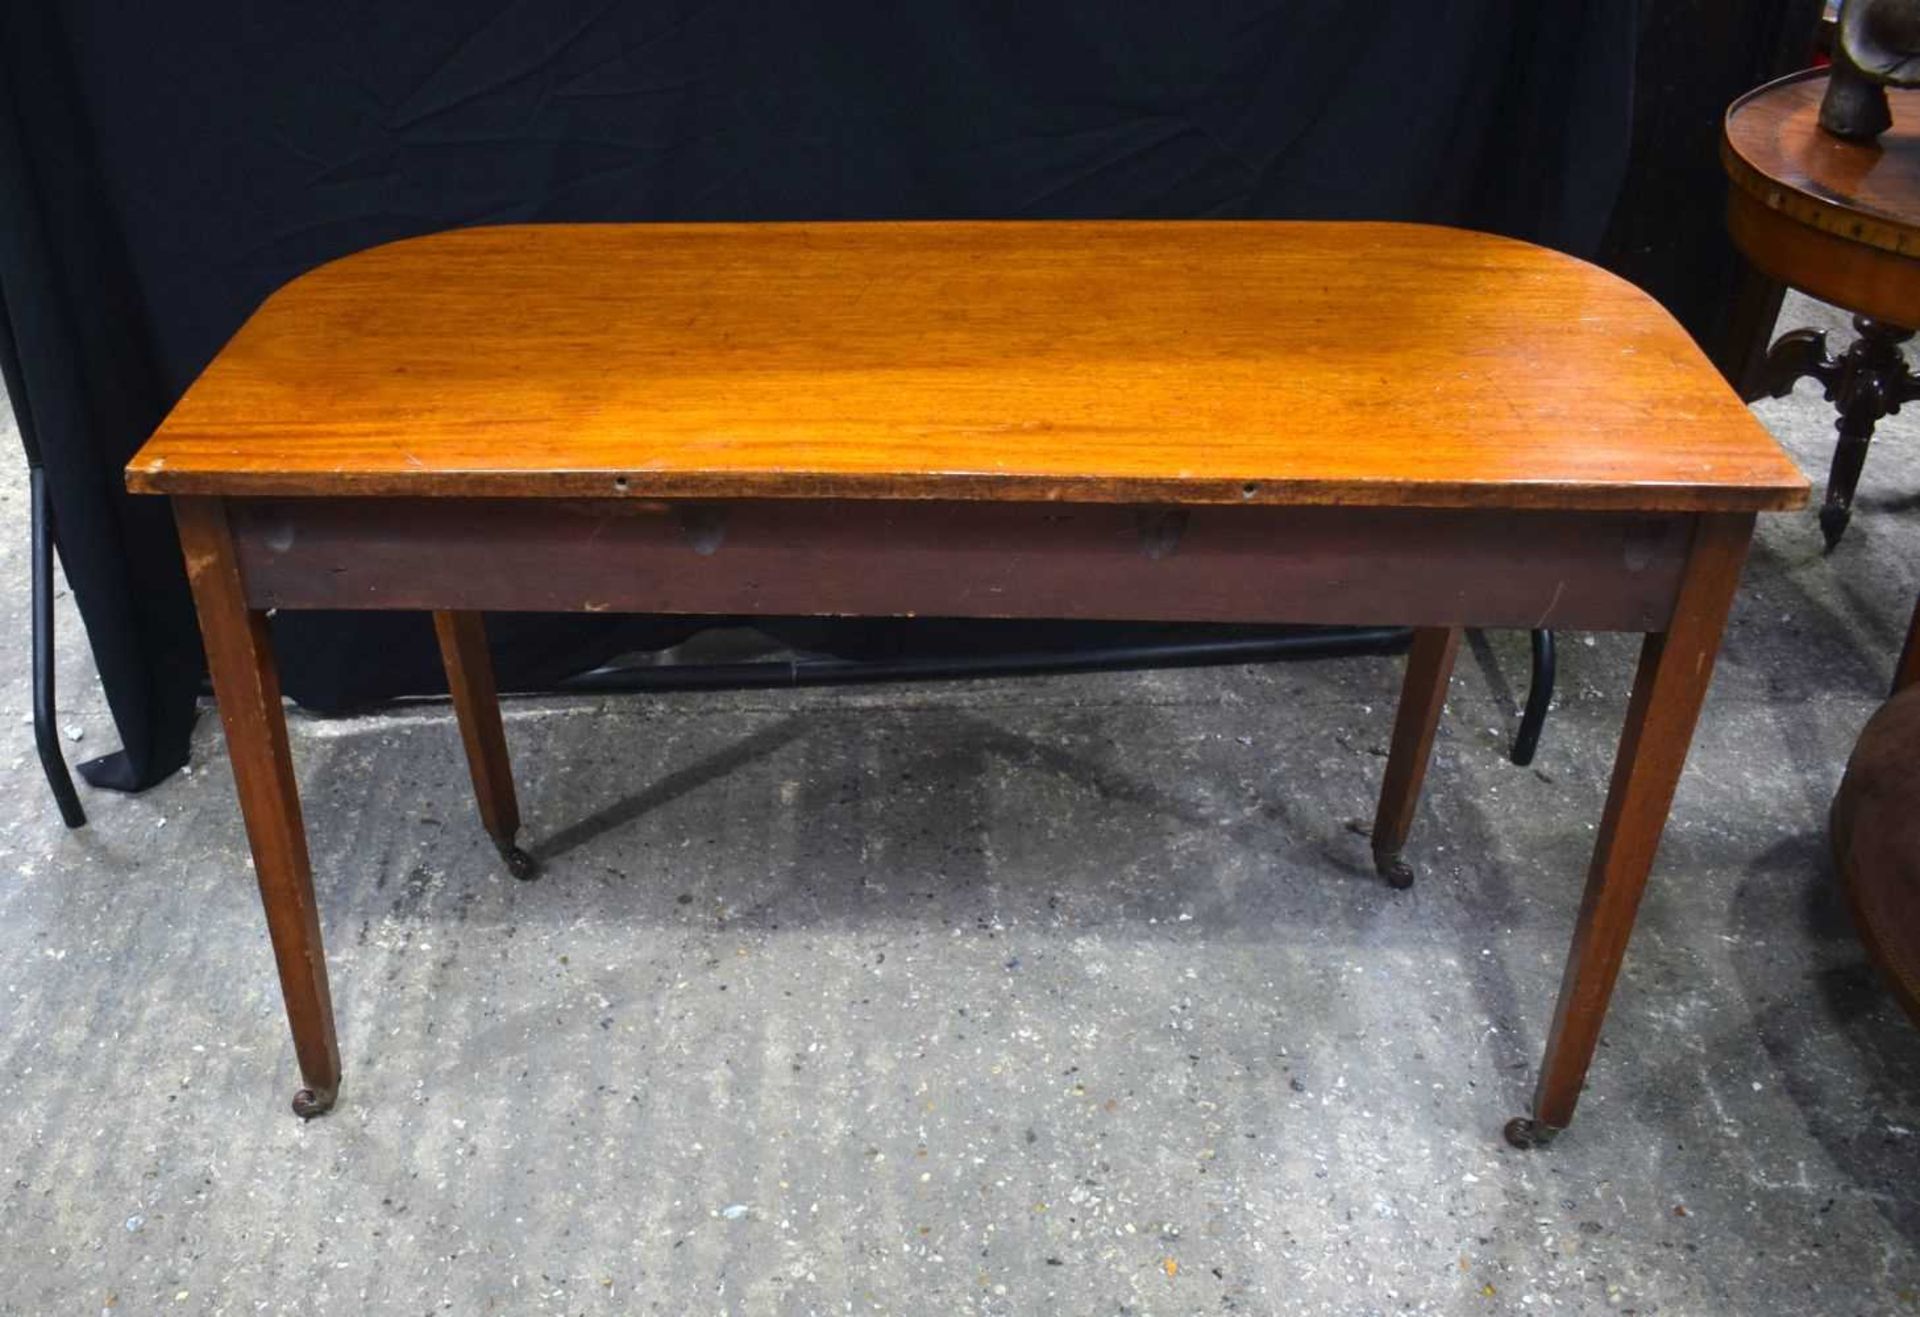 A 19th Century Bow fronted mahogany top side table with castored legs 75 x 124 x 53 cm. - Image 4 of 4